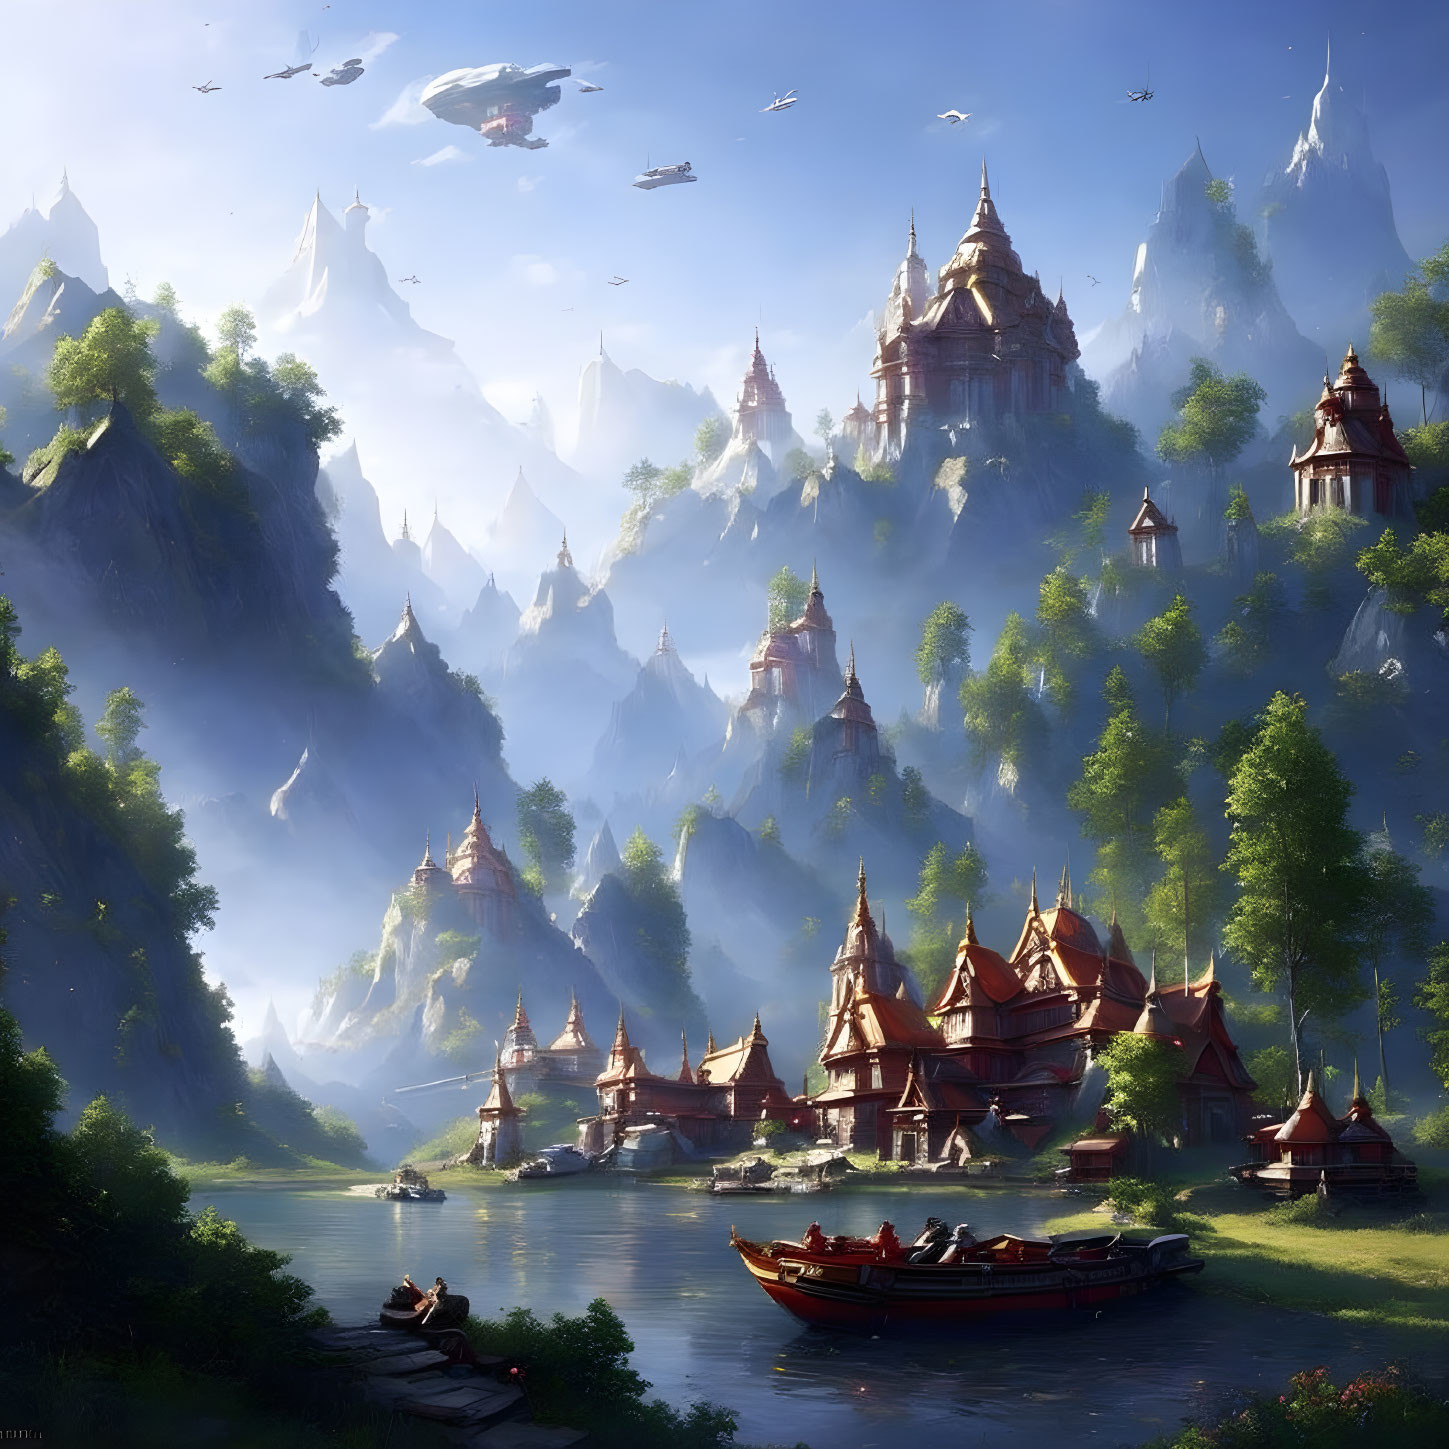 Fantasy landscape with ornate buildings, craggy peaks, river, boat, and floating islands